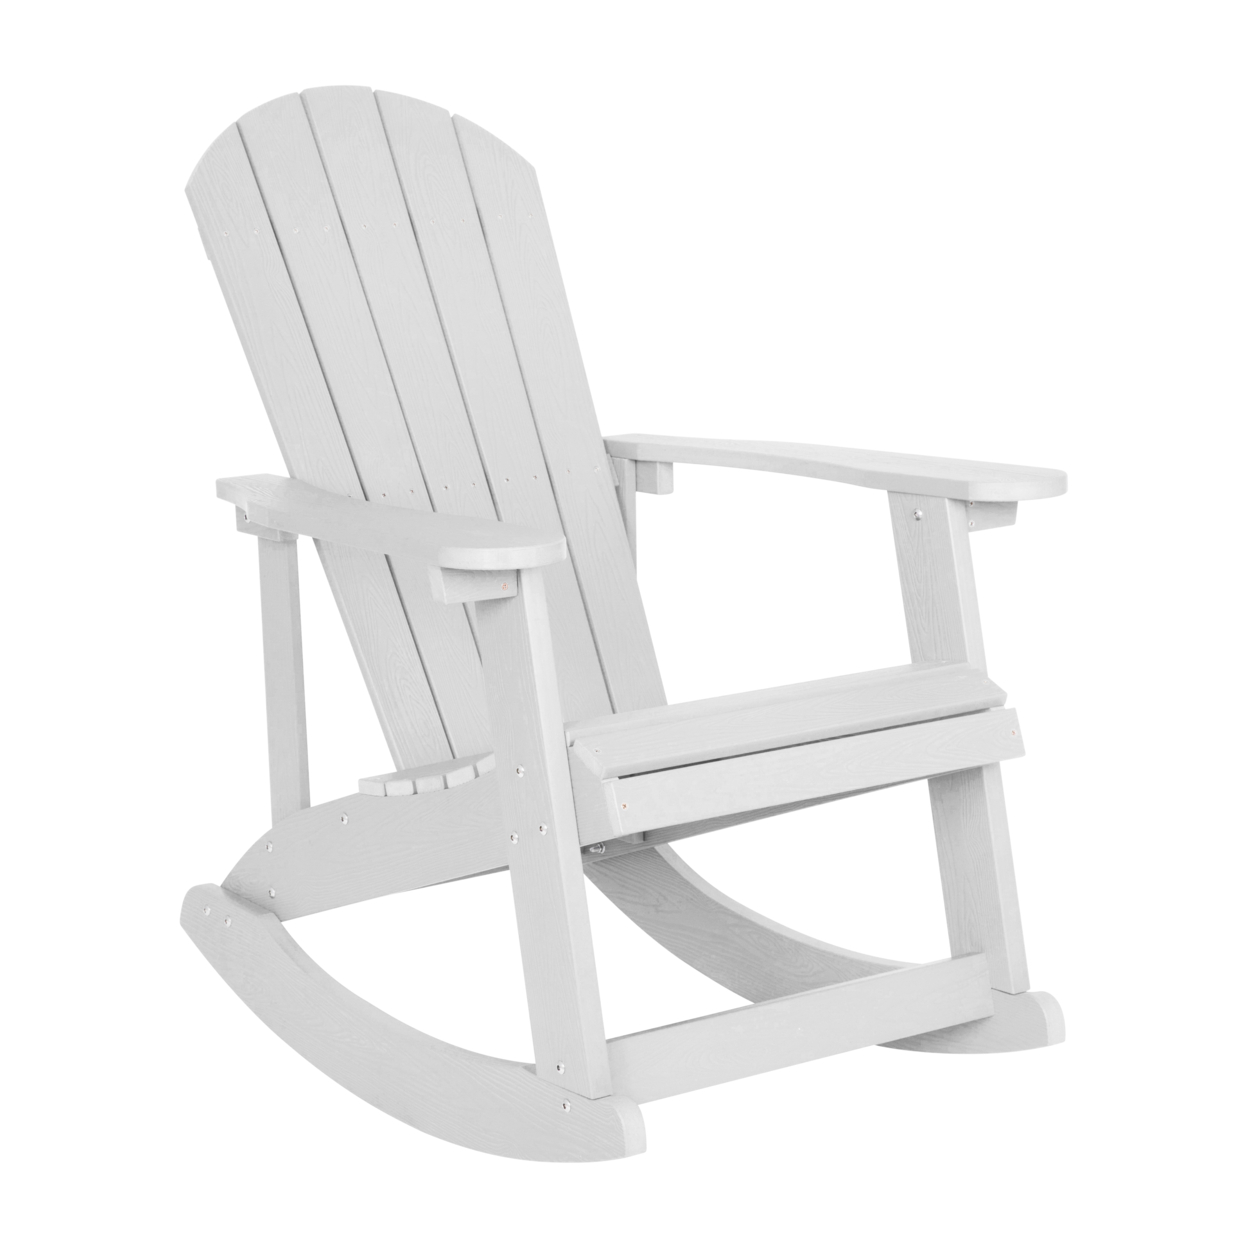 Savannah All-Weather Poly Resin Wood Adirondack Rocking Chair With Rust Resistant Stainless Steel Hardware In White